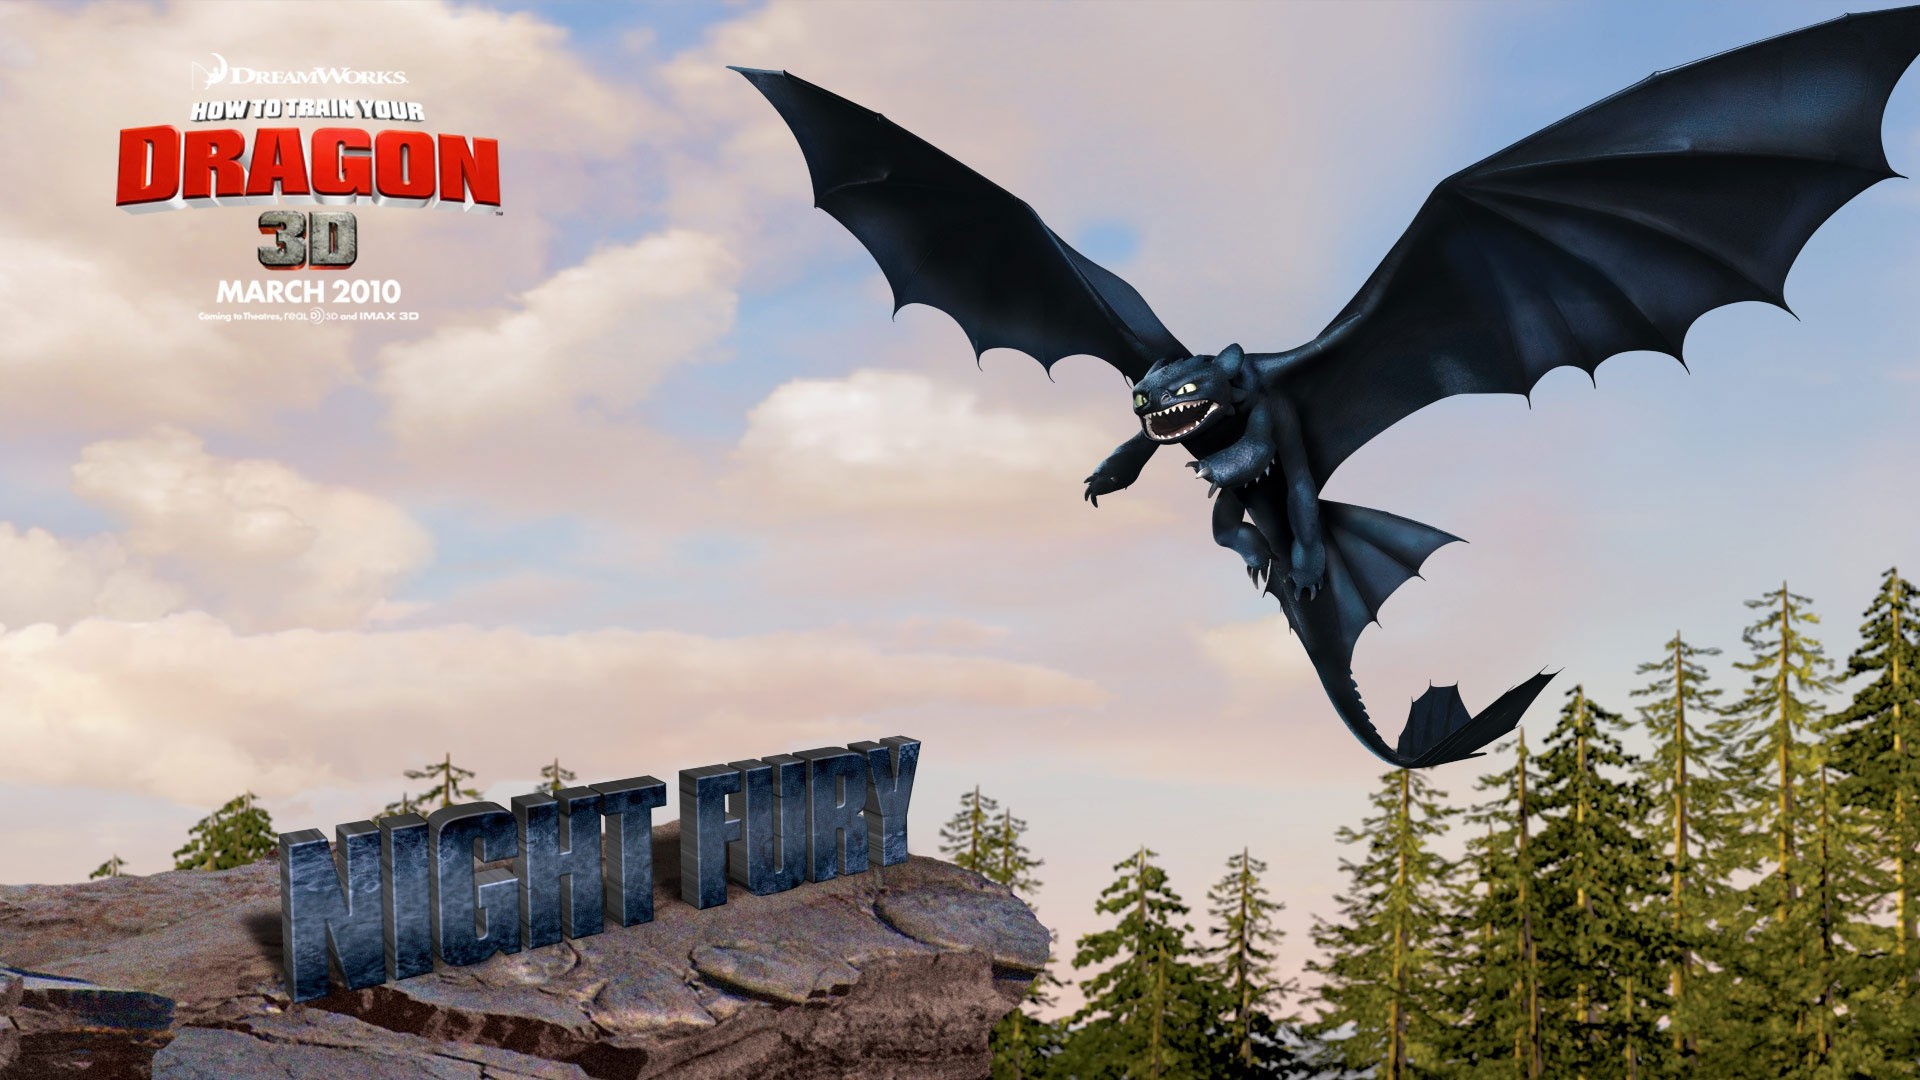 1920x1080 ... Full HD 1080p Toothless Wallpapers HD, Desktop Backgrounds